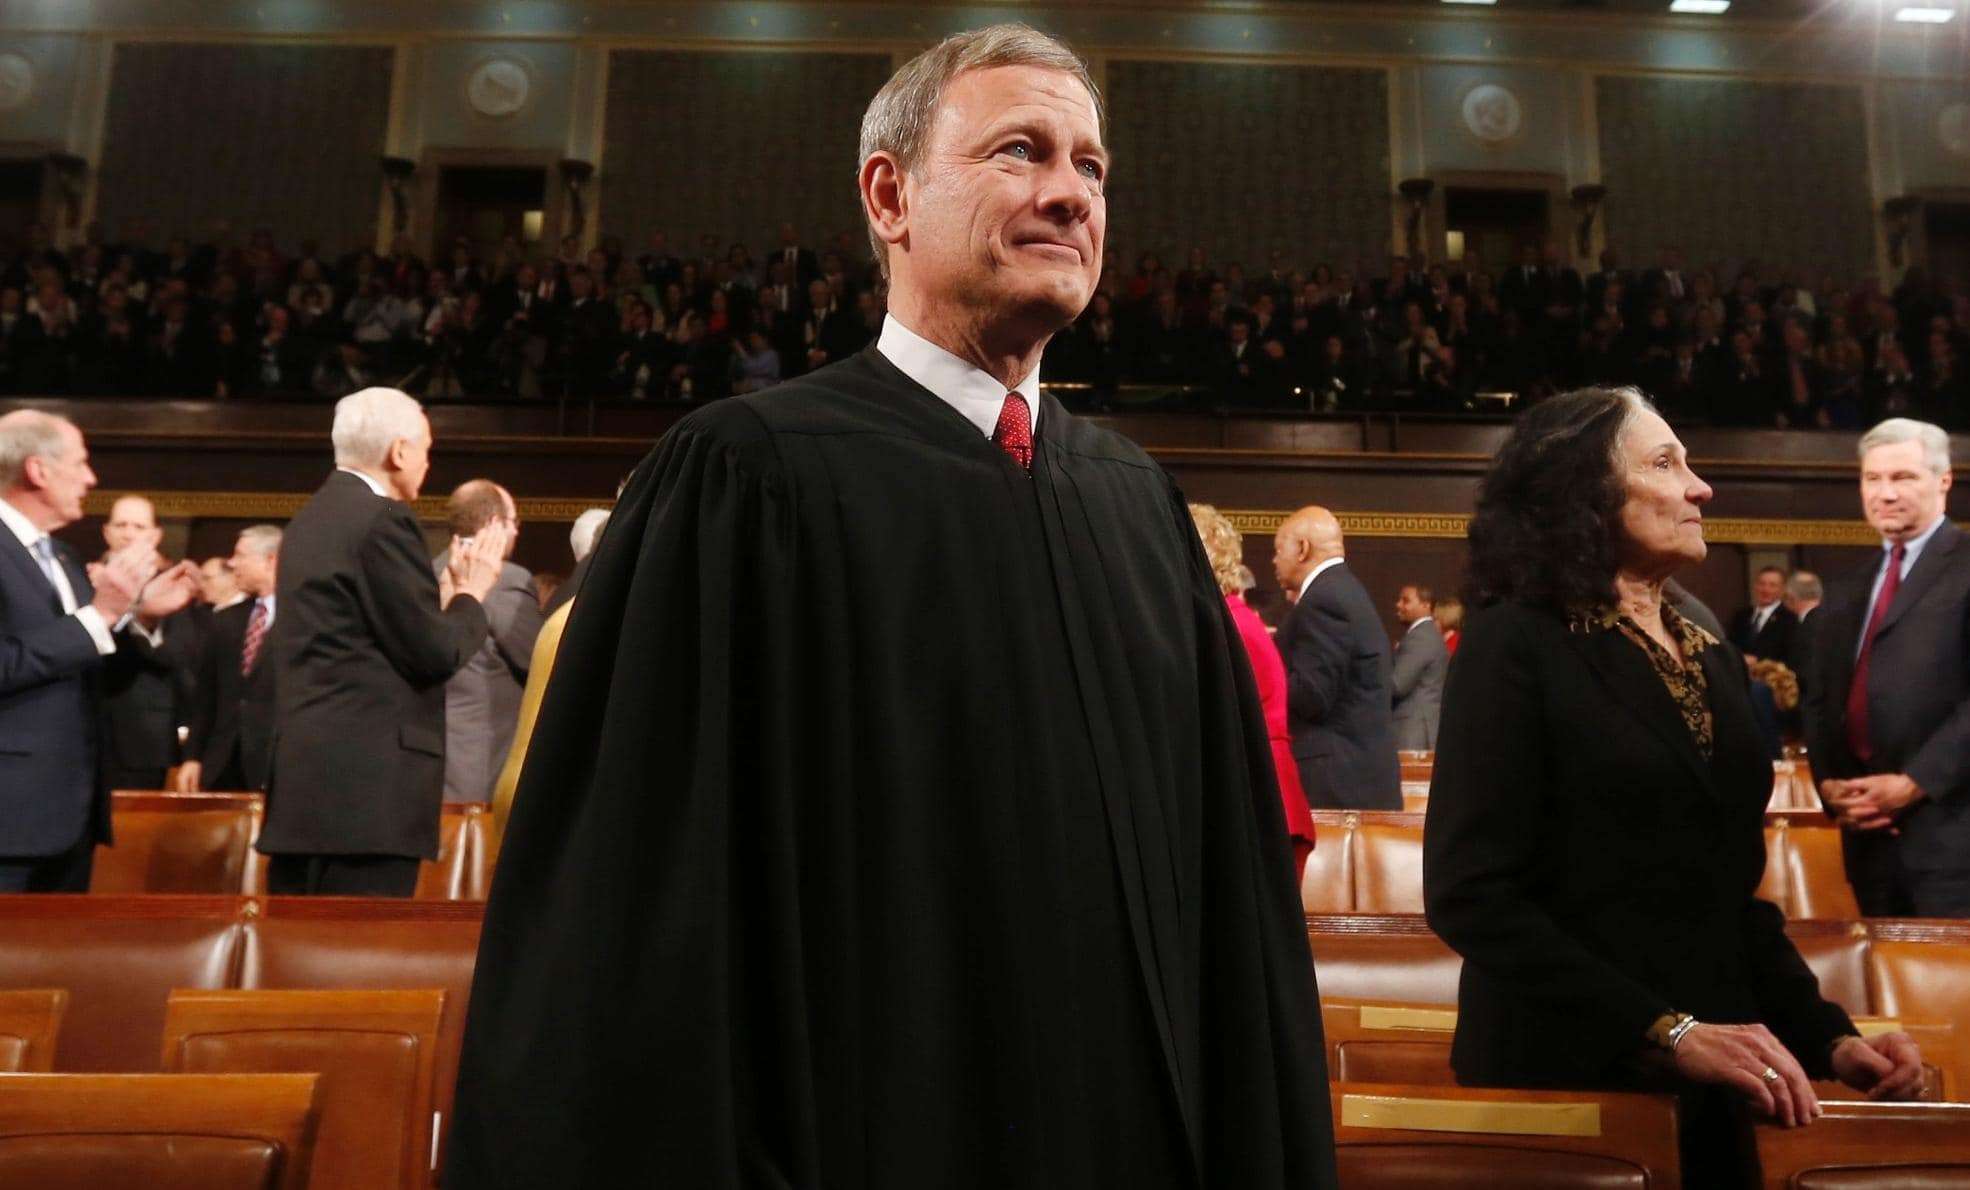 U.S. Supreme Court Chief Justice John Roberts arrives prior to President Barack Obama's State of the Union speech on Capitol Hill in Washington, in this file photo taken January 28, 2014. (REUTERS/Larry Downing/Files)